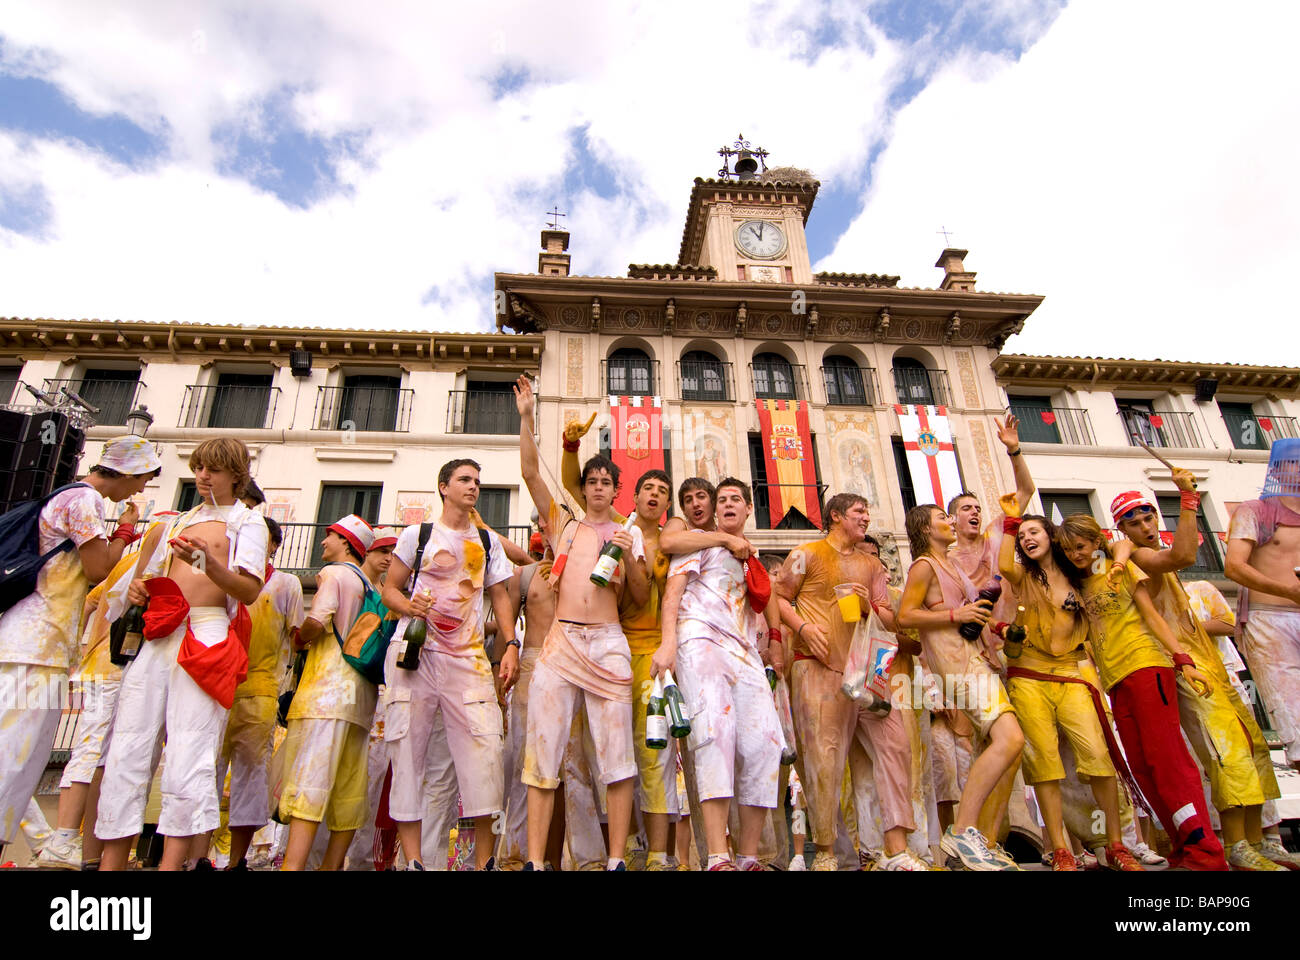 Chupinazo, opening ceremony celebration during Fiestas in Spain. Stock Photo